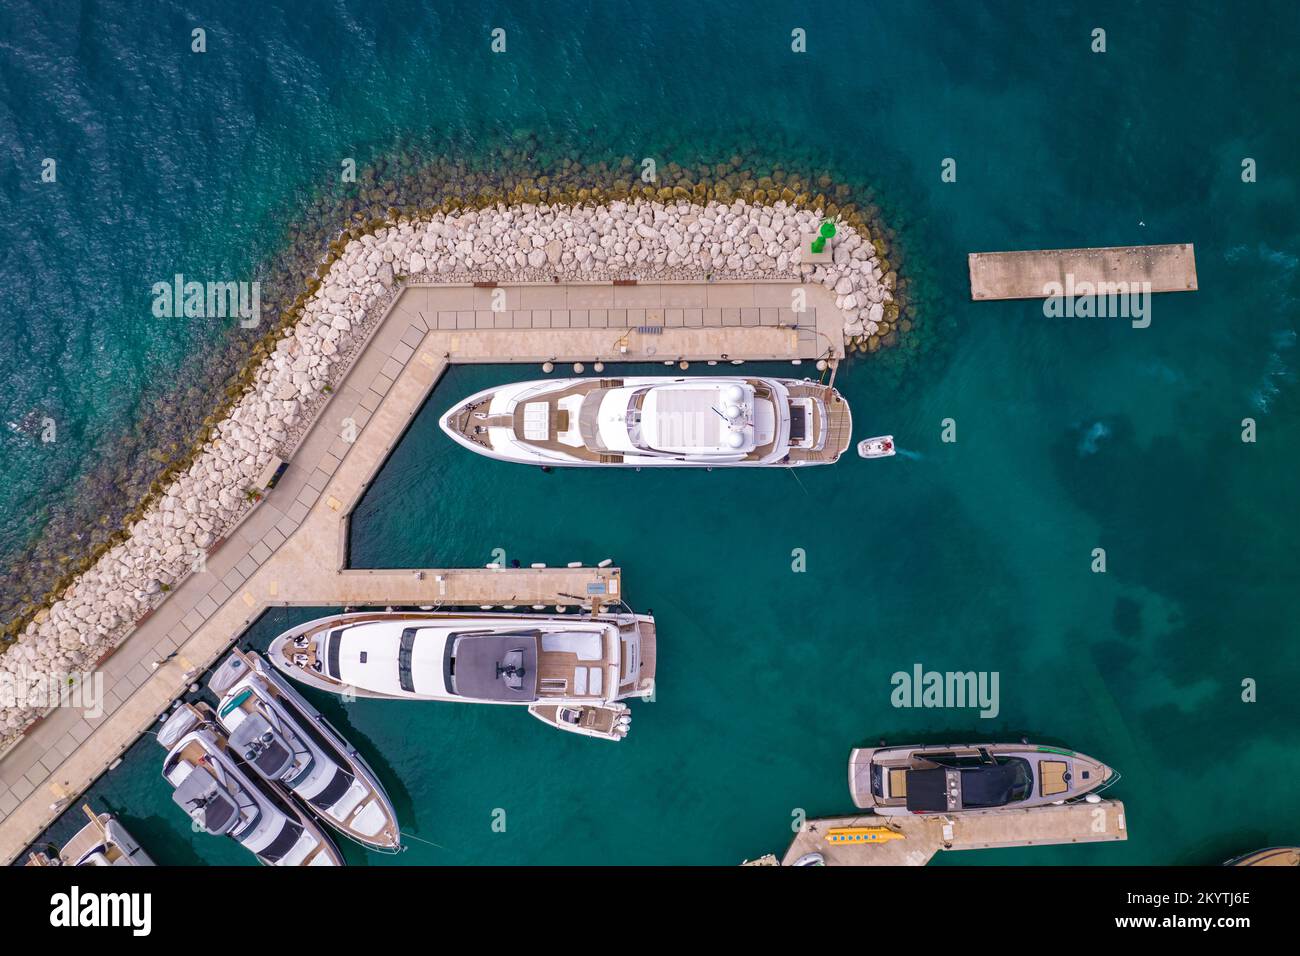 The aerial view on croatian beach and yachts pier in Adriatic sea. Marina Lav hotel and embankment near it. Boats and yachts staying in the bay. Stock Photo